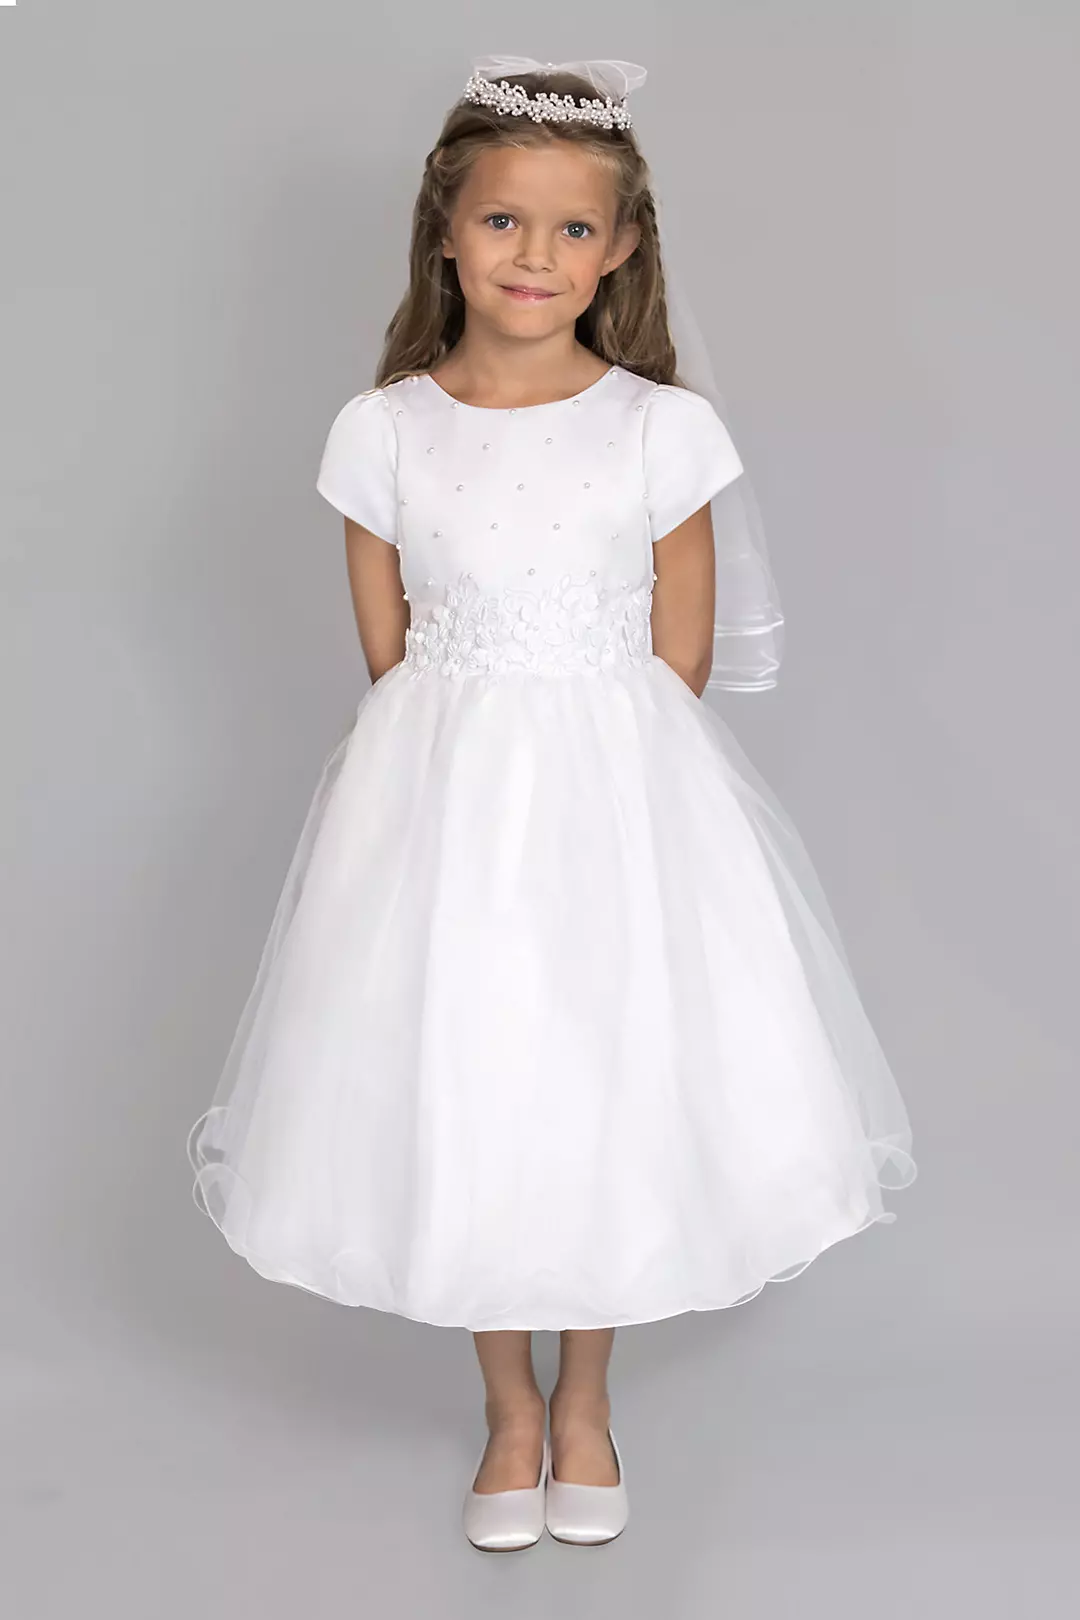 Satin and Tulle Beaded Communion Dress Image